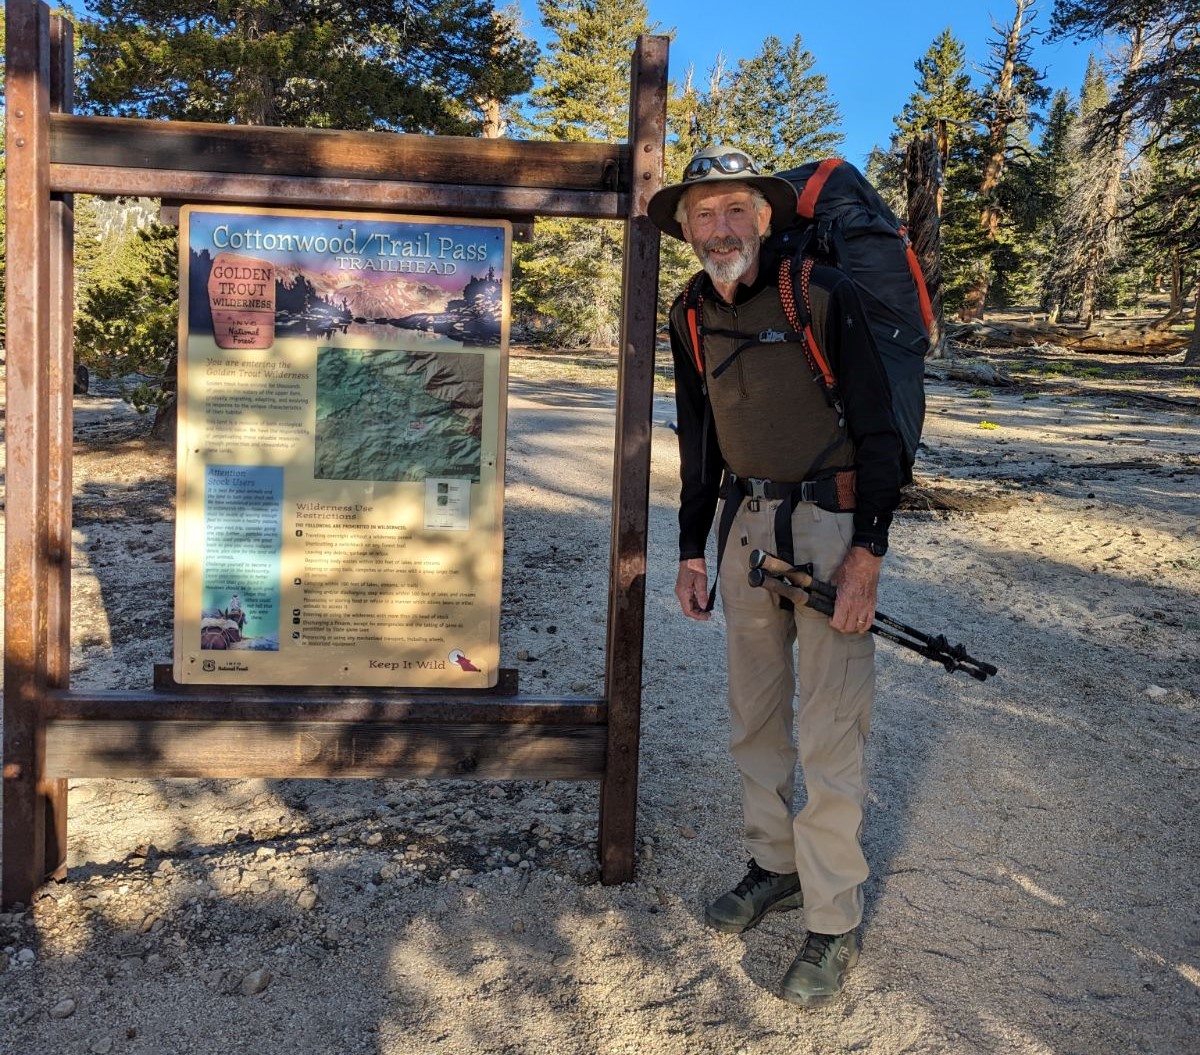 Slim man with gray beard in backpacking gear poses next to a sign reading "Cottonwood/Trail Pass"